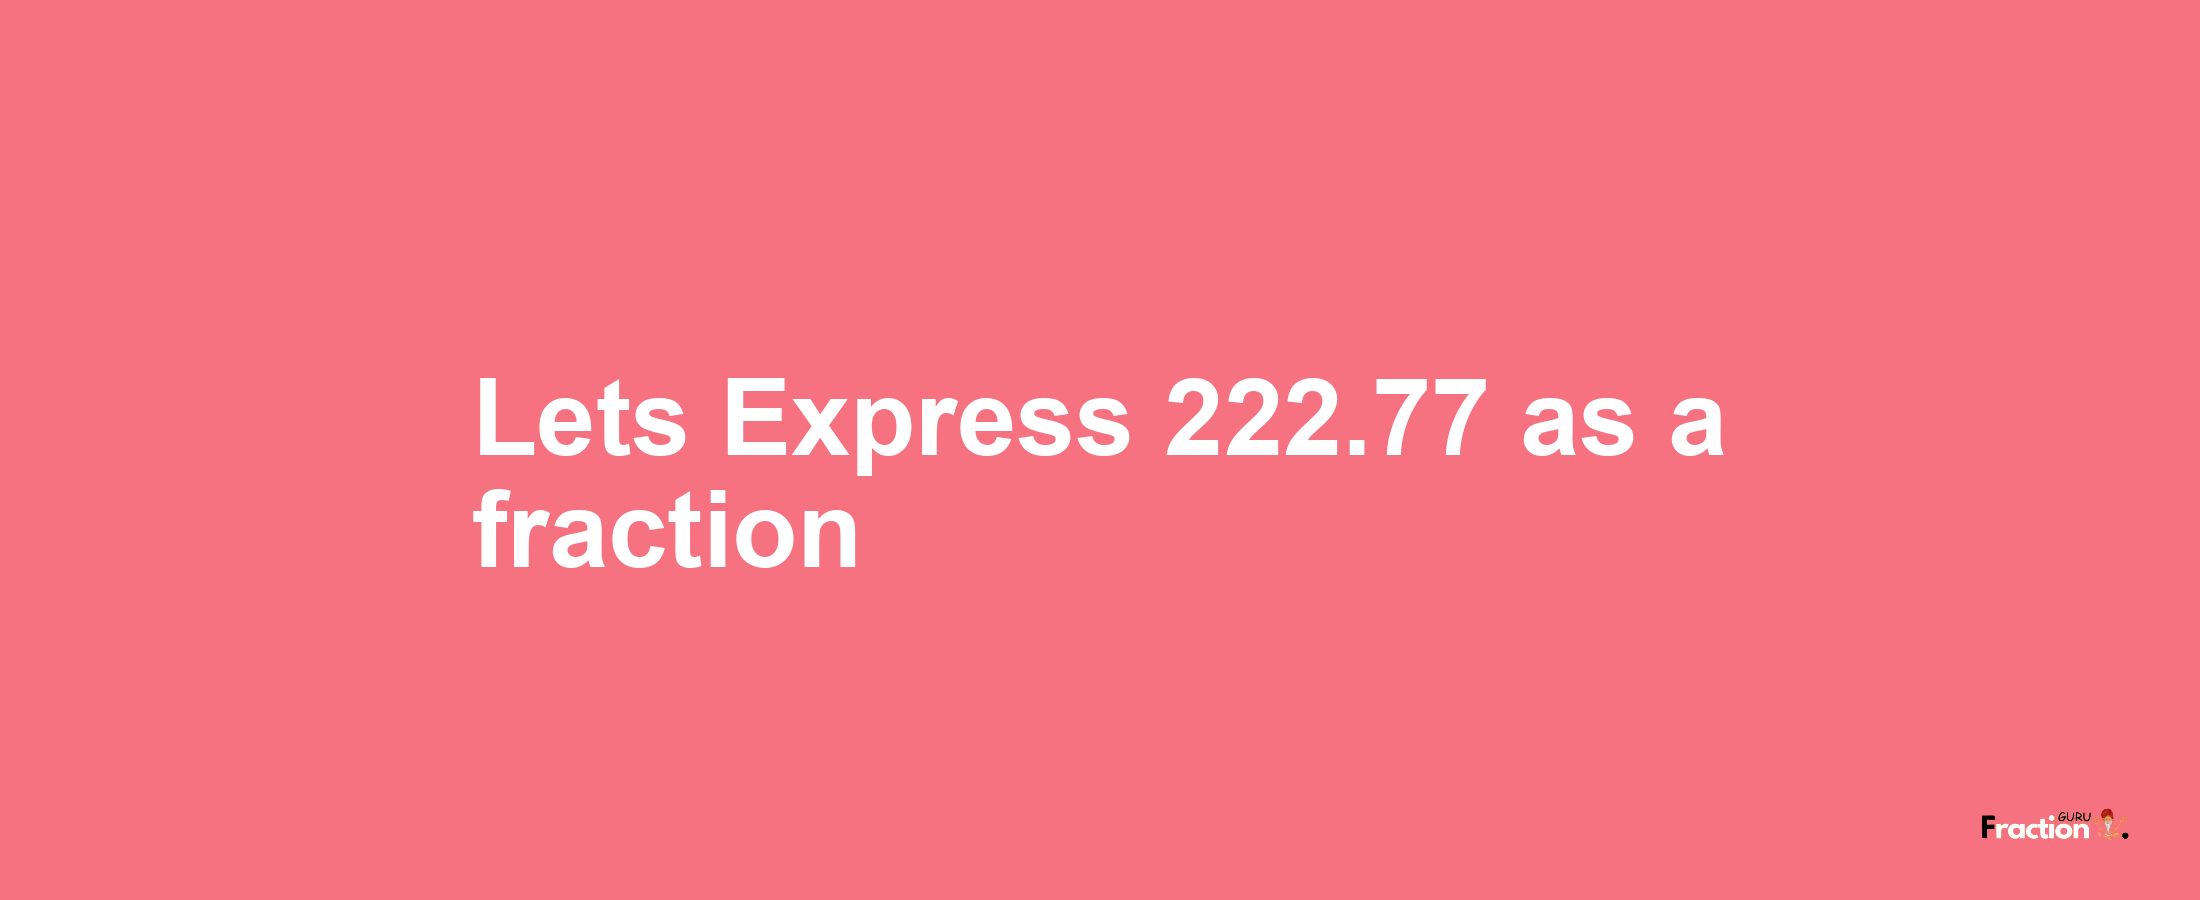 Lets Express 222.77 as afraction